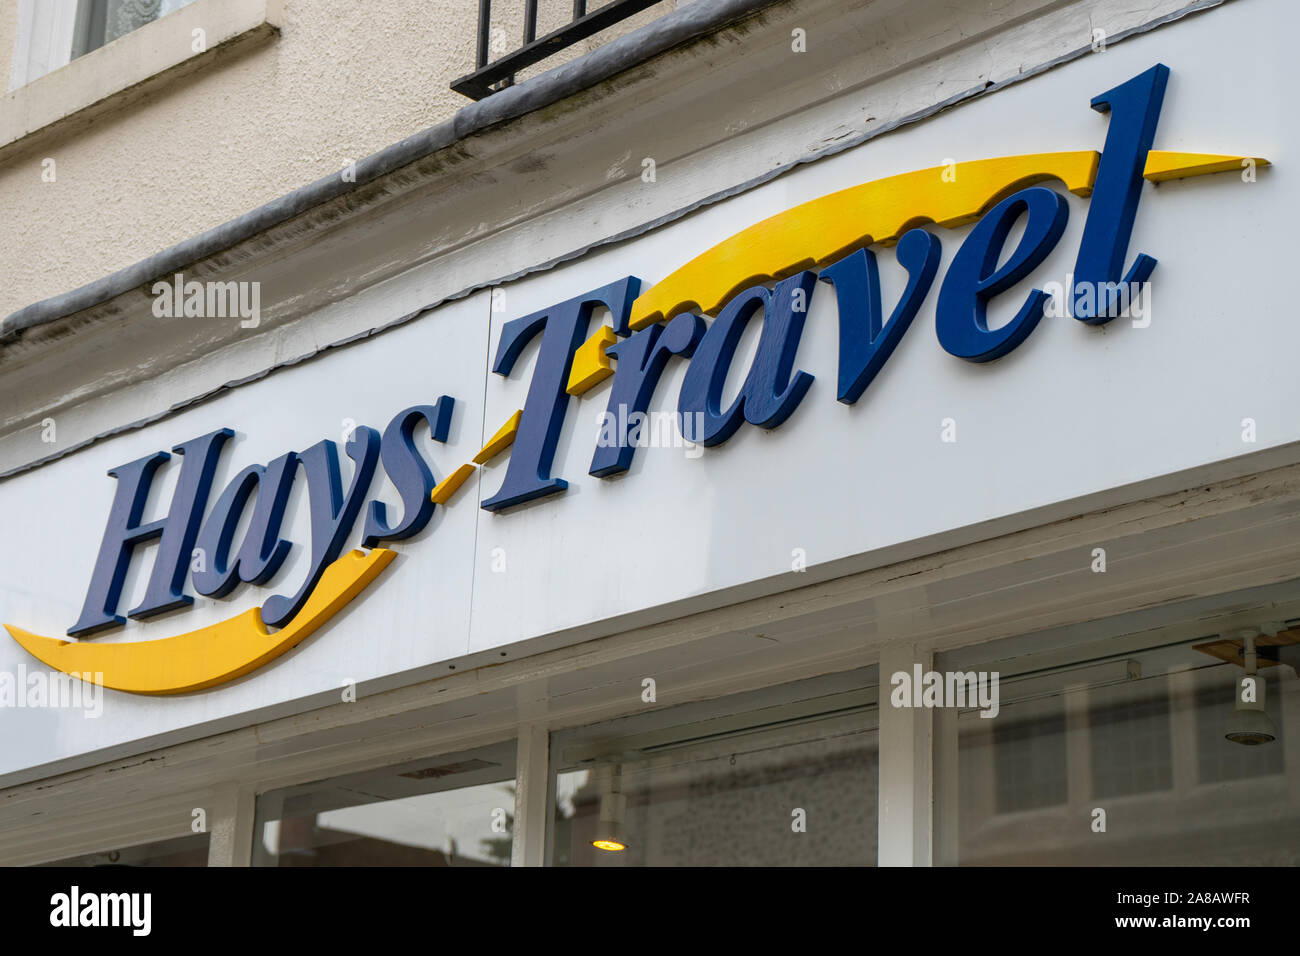 The sign above a Hays travel shop or store Stock Photo